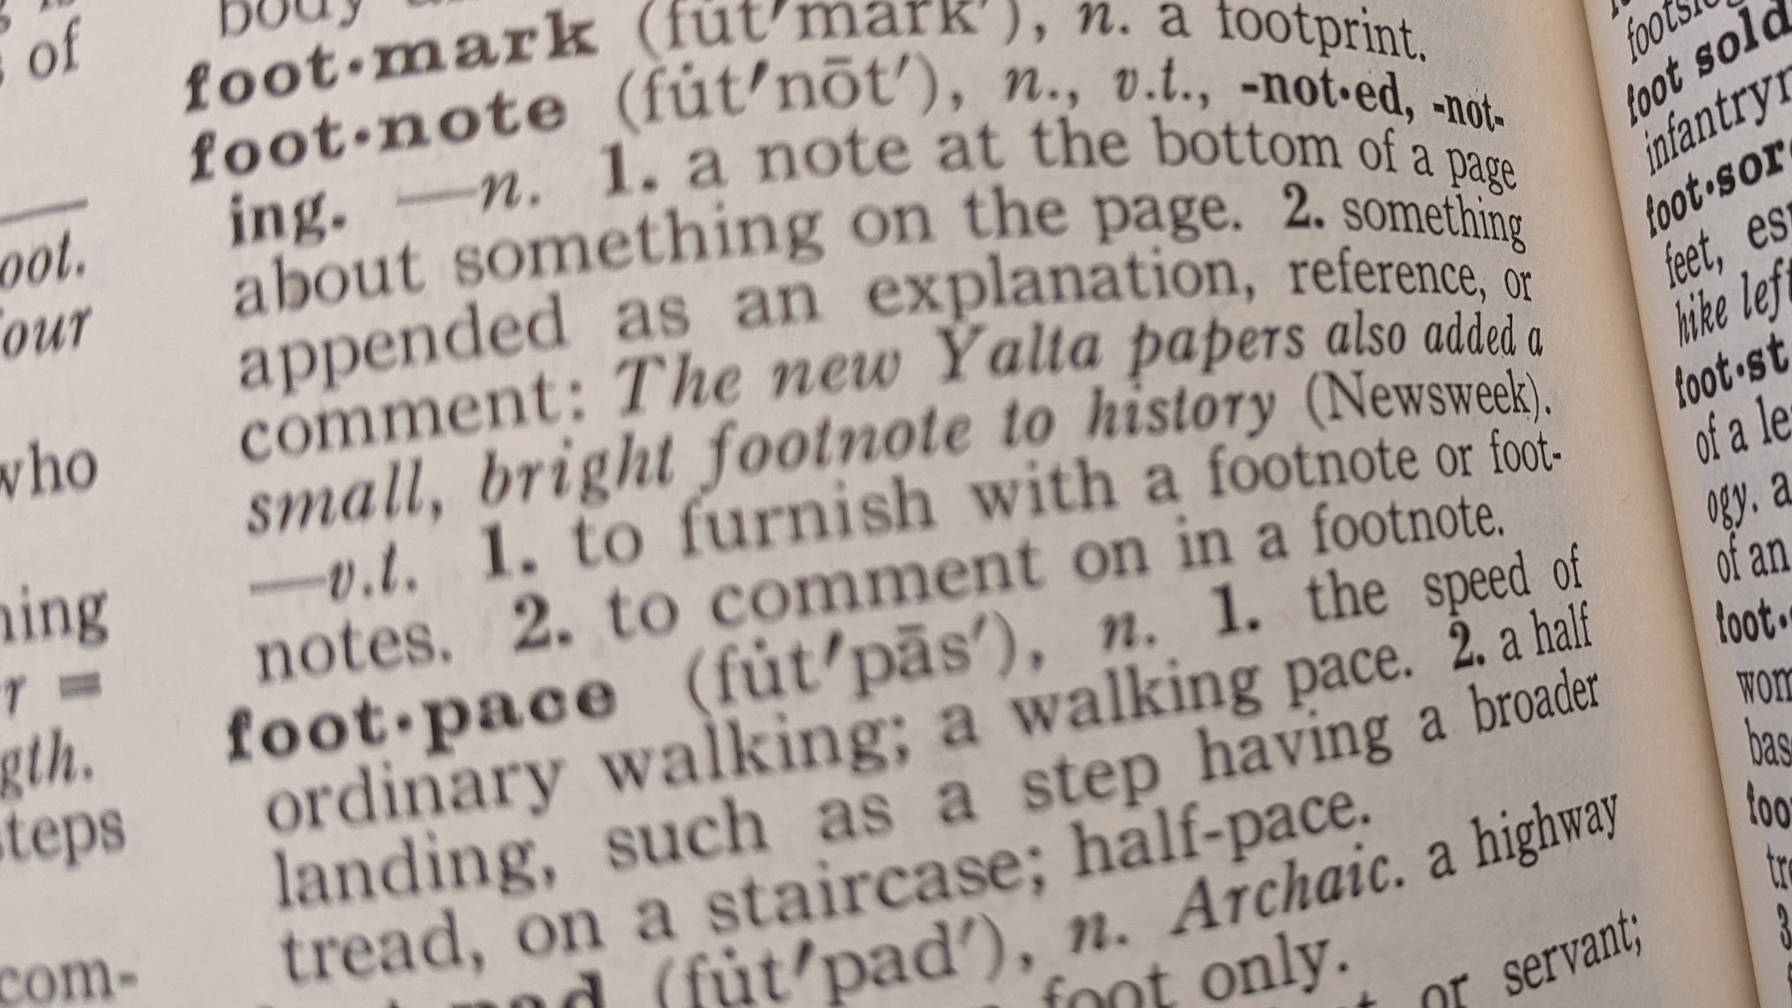 Decorative image of a page in a dictionary, highlighting the "footnote" definition.